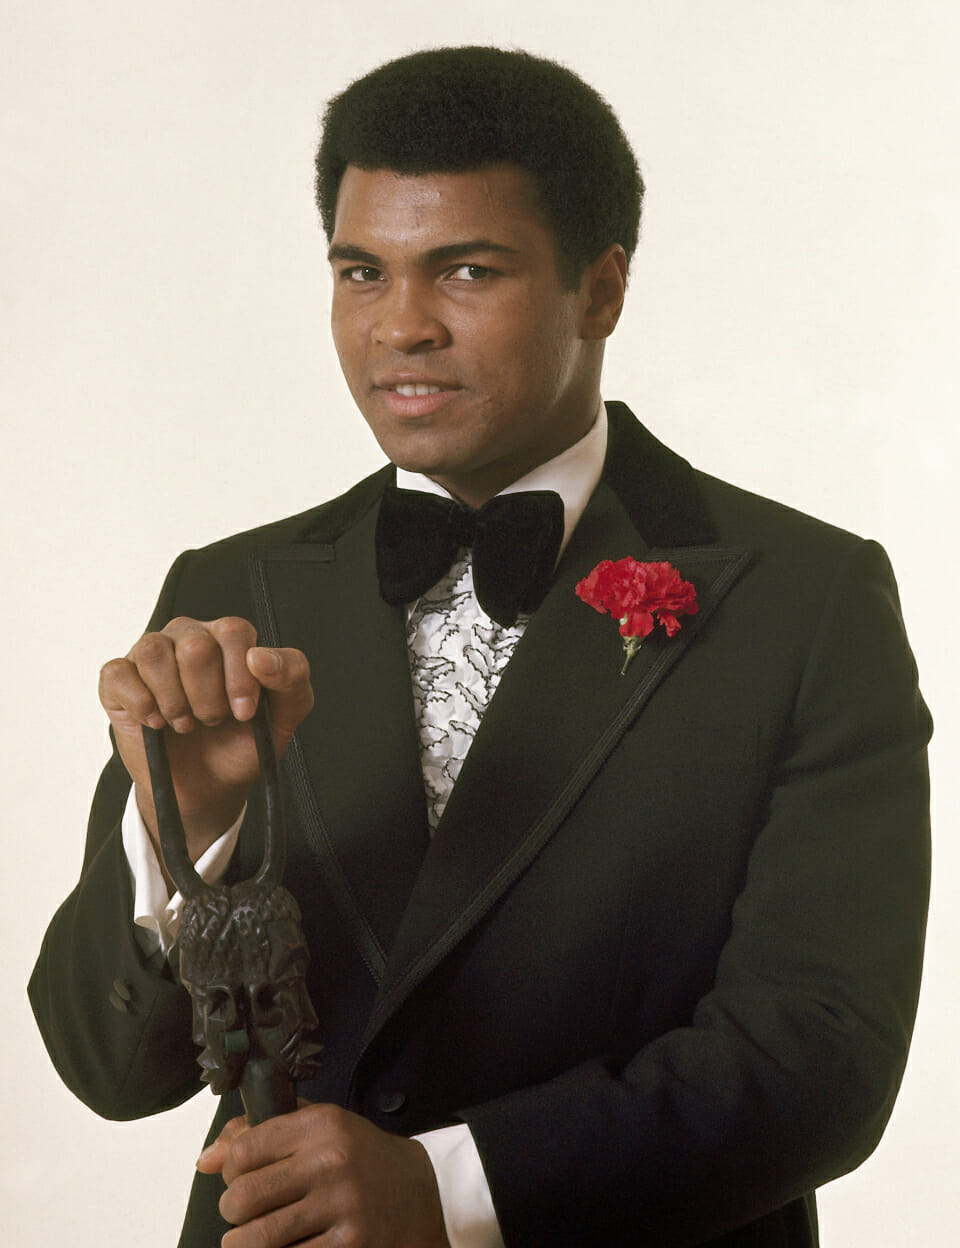 Portrait of Muhammad Ali wears a tuxedo during the Sportsman of the Year photo shoot at Playboy Studios. Chicago, Illinois 11/20/1974 (Image # 4033 )